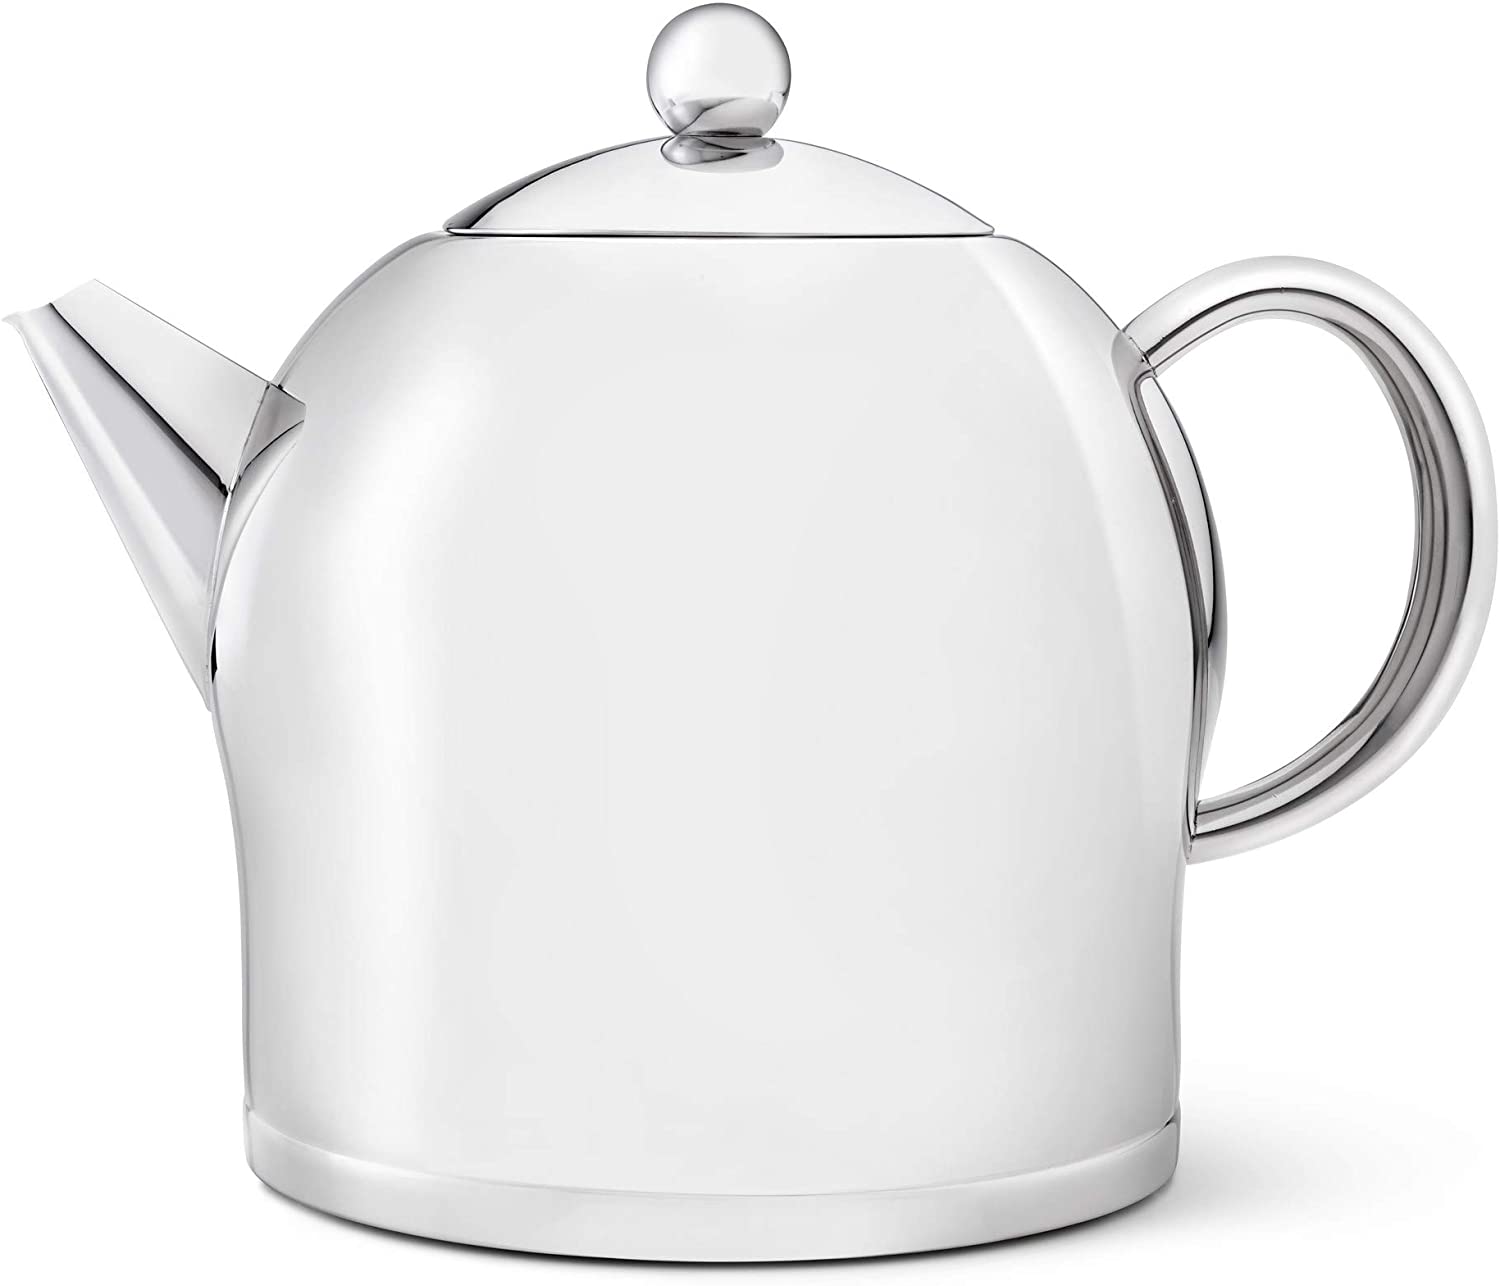 Bredemeijer Large double-walled stainless steel teapot 2.0 litres.